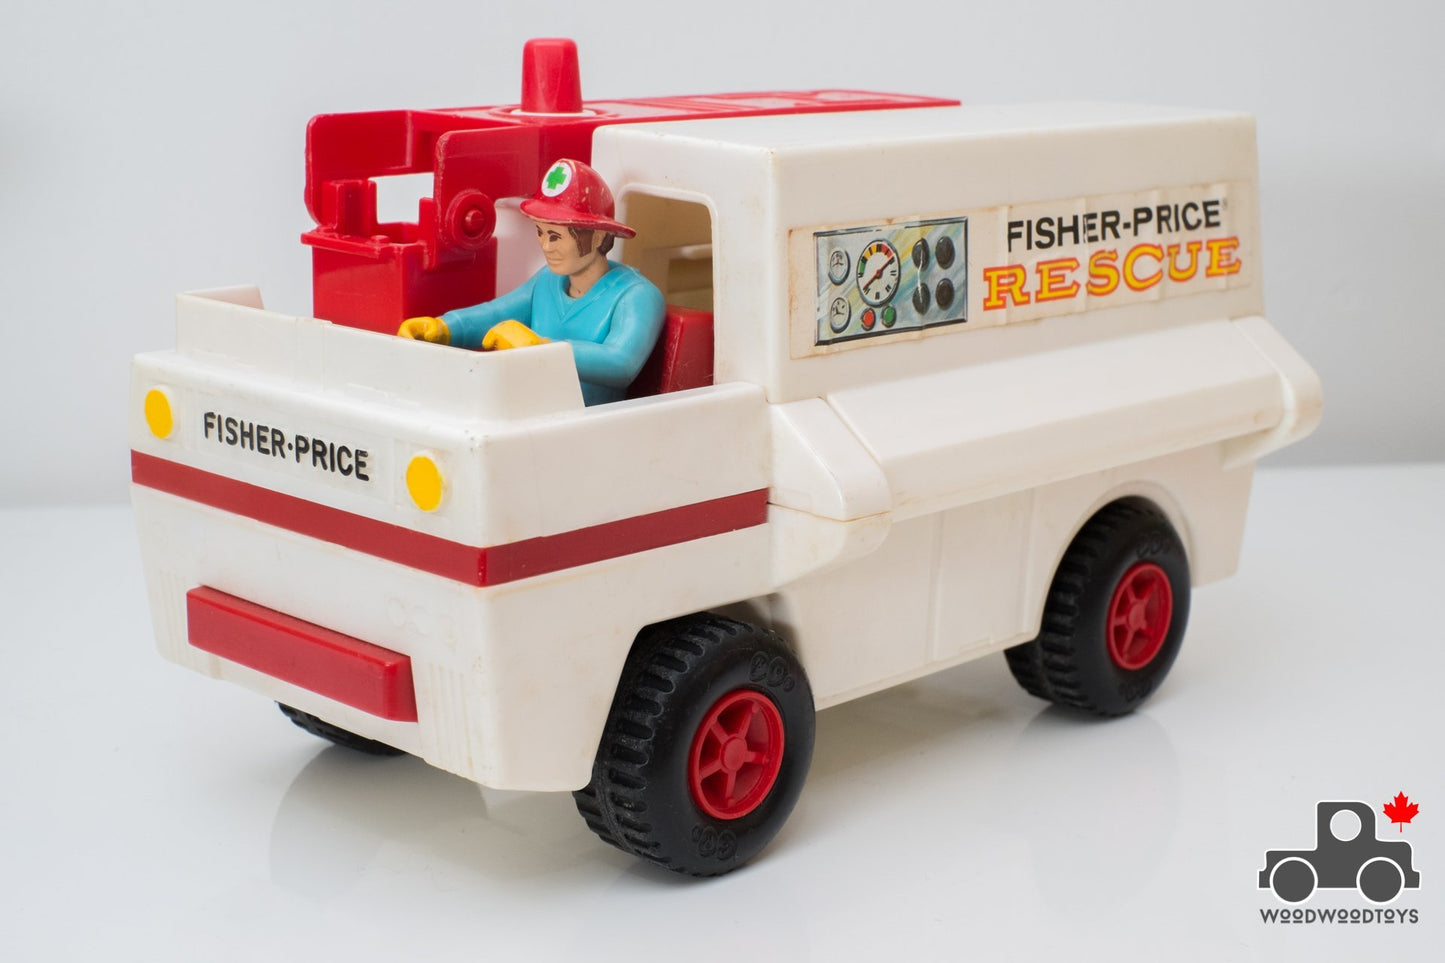 Vintage Fisher Price Adventure People Emergency Rescue Truck - Wood Wood Toys Canada's Favourite Montessori Toy Store